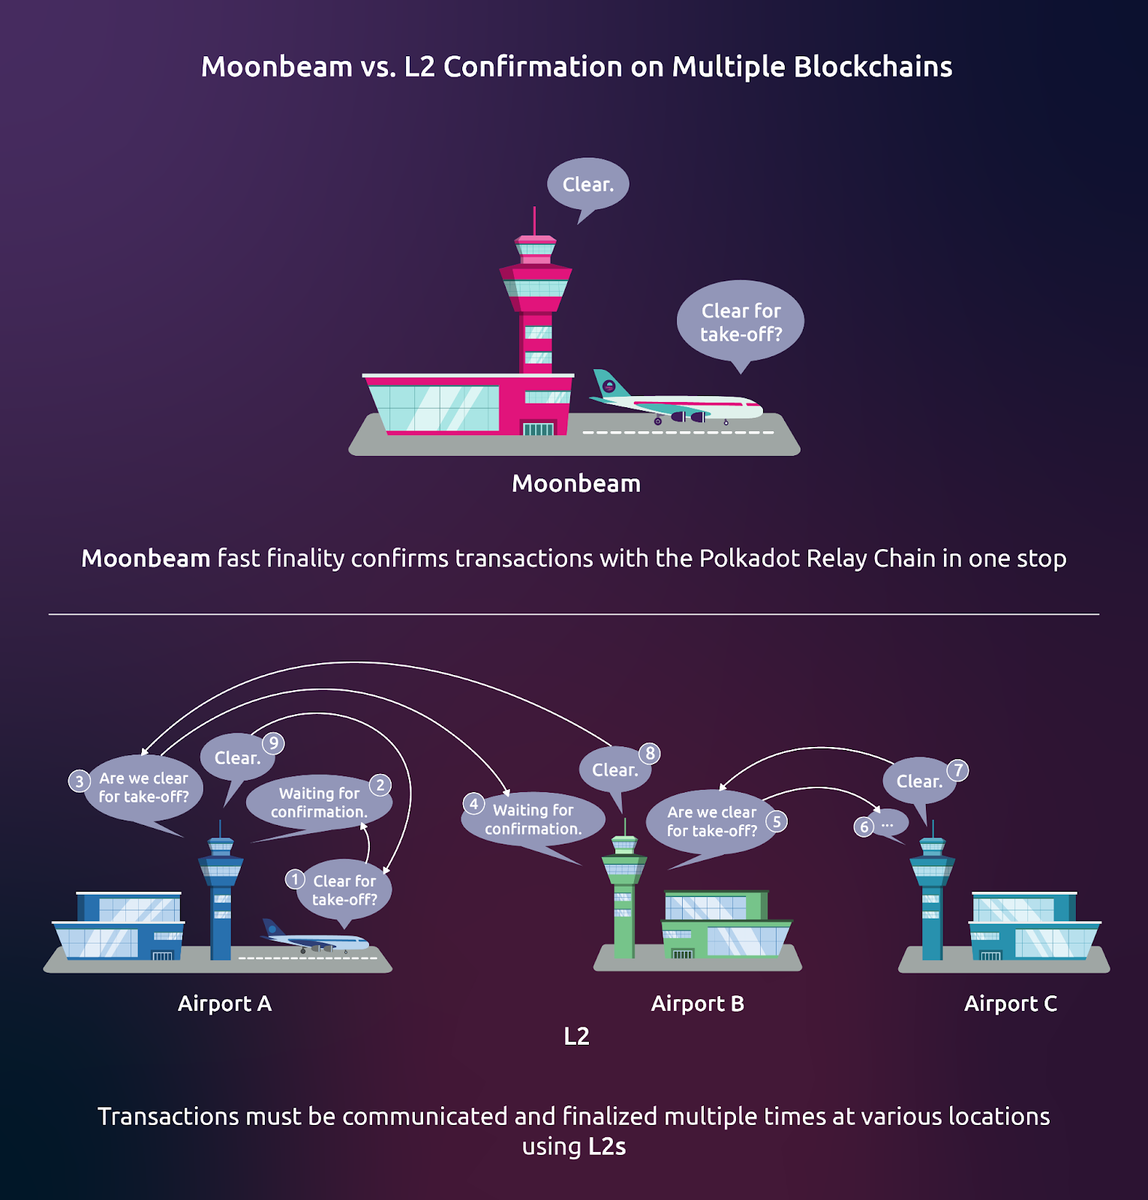 Discover the advantages of Moonbeam's fast finality over Layer 2 solutions in the context of multiple blockchain confirmations